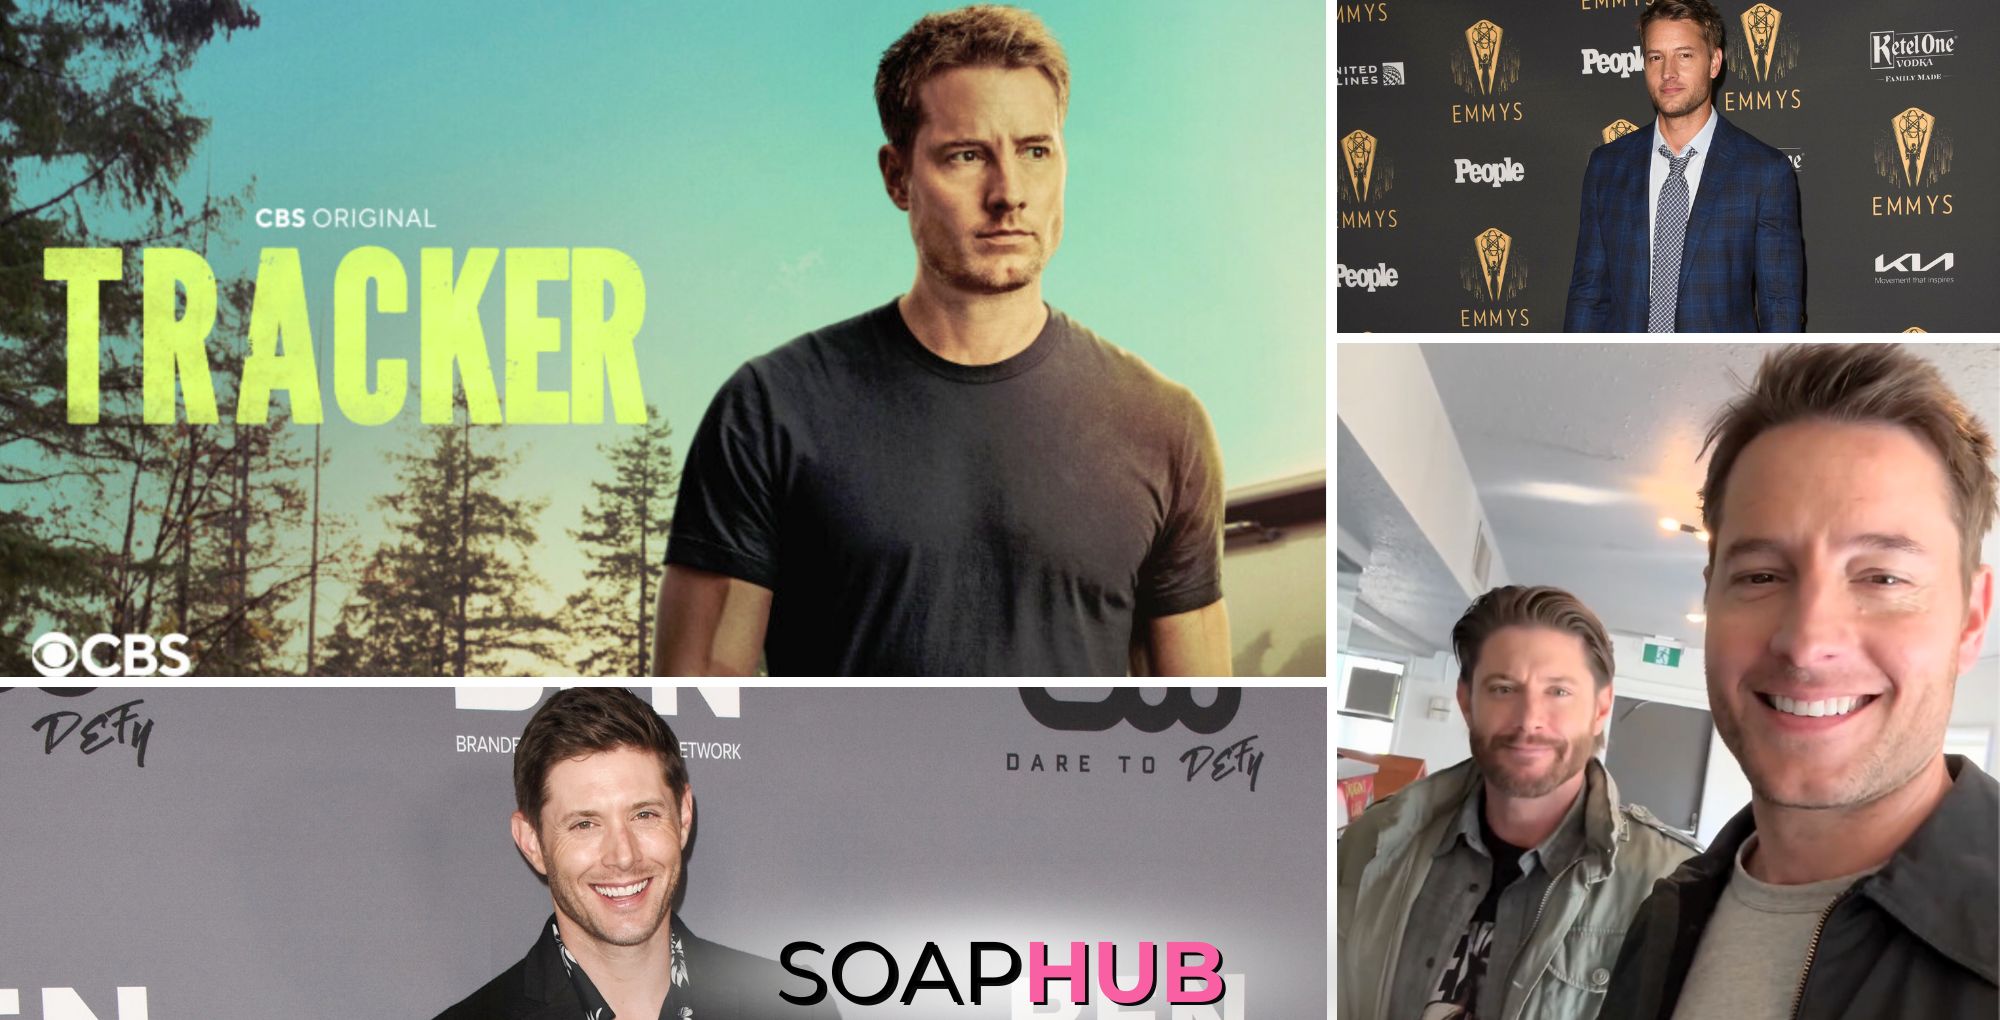 Justin Hartley Confirms “Perfect Casting Choice” To Play Brother on CBS’s Tracker…Jensen Ackles